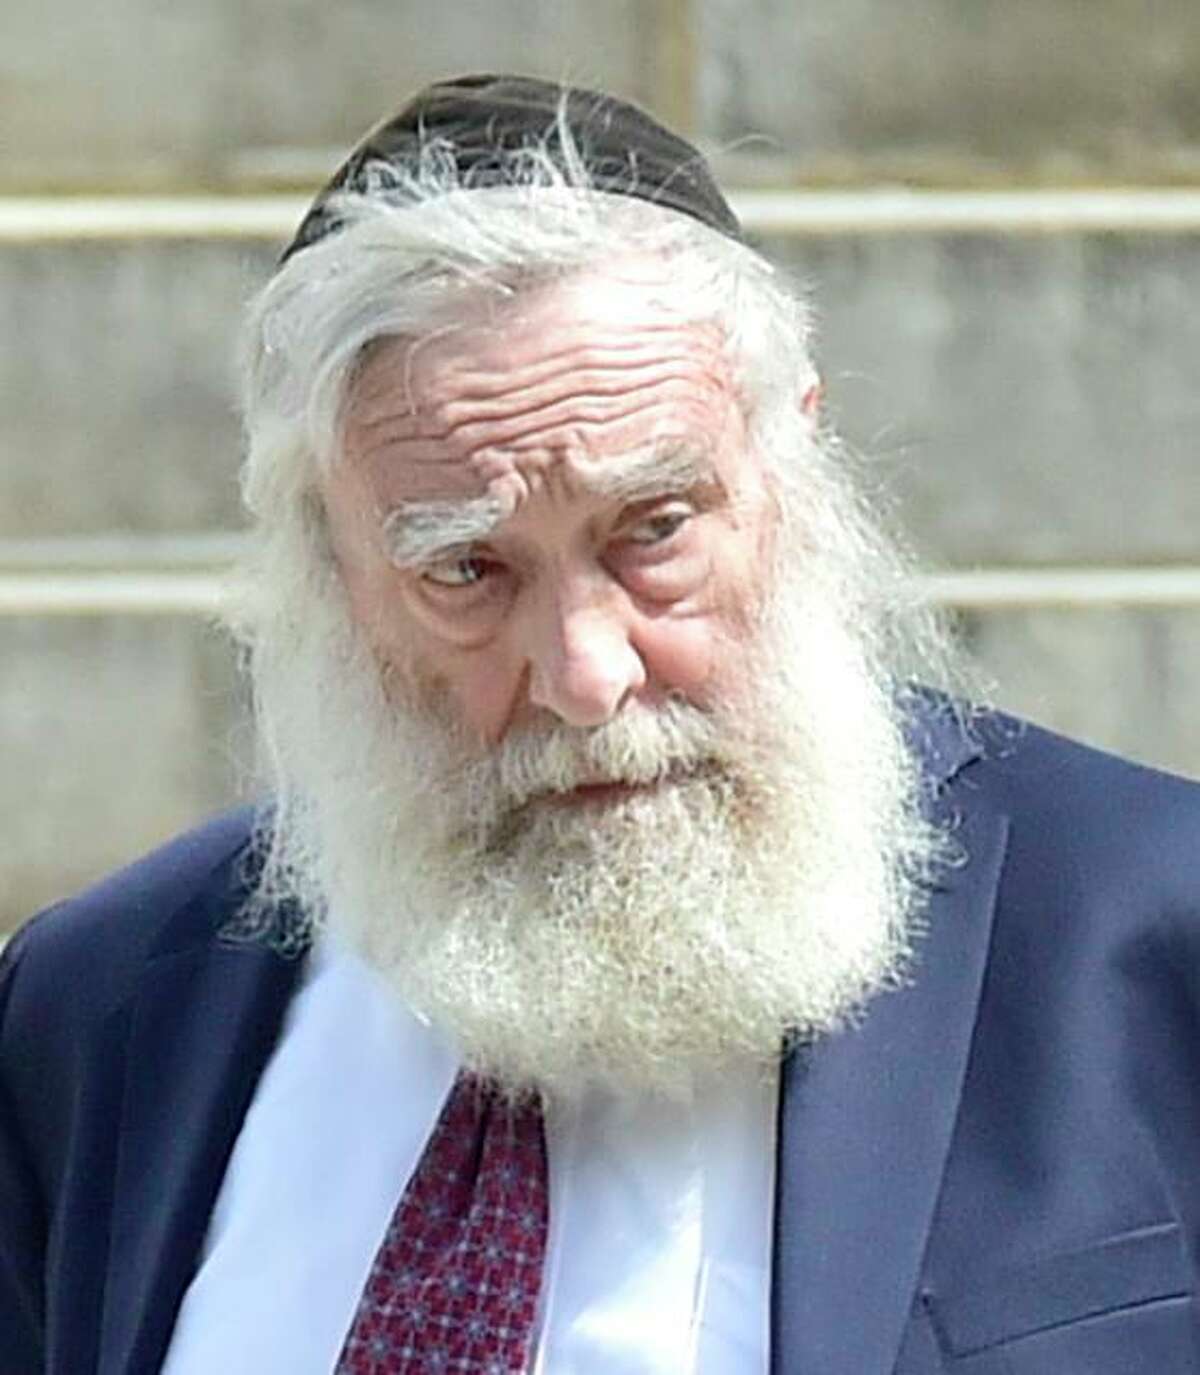 Rabbi Daniel Greer, 77, of New Haven, leaves New Haven Superior Court on Elm Street in New Haven, Conn. Monday, August 14, 2017 after he was arraigned on a criminal charge of second-degree sexual assault and risk of injury to a minor. Greer did not enter a plea. The alleged victim in the criminal charge is Eliyahu Mirlis, of New Jersey, who was awarded $15 million in in his civil lawsuit against Greer in May of 2016. Greer was a dean of the Yeshiva of New Haven/the Gan School, where the alleged victim was a high school student. Greer was accused in May 2016 of repeatedly sexually assaulting Mirlis, of New Jersey, over several years in the early- to mid-2000s. Mirlis attended the school from 2001 to 2005. Greer has denied the allegations.